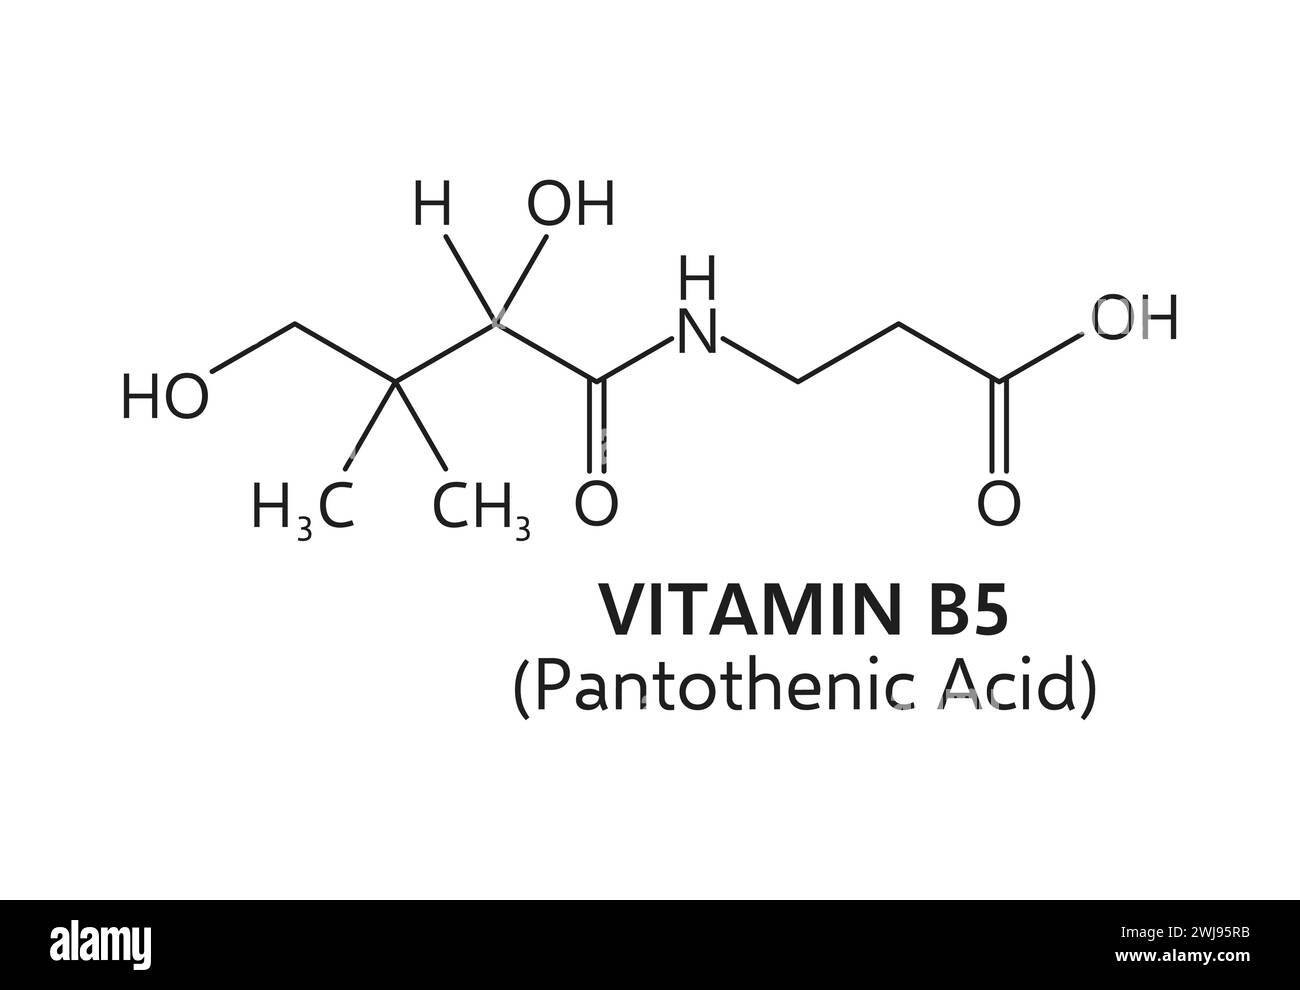 Vitamin b5, or pantothenic acid chemical formula structure comprising a pantoic acid moiety linked to a beta-alanine group. Vector scheme of element that plays a crucial role in energy metabolism Stock Vector